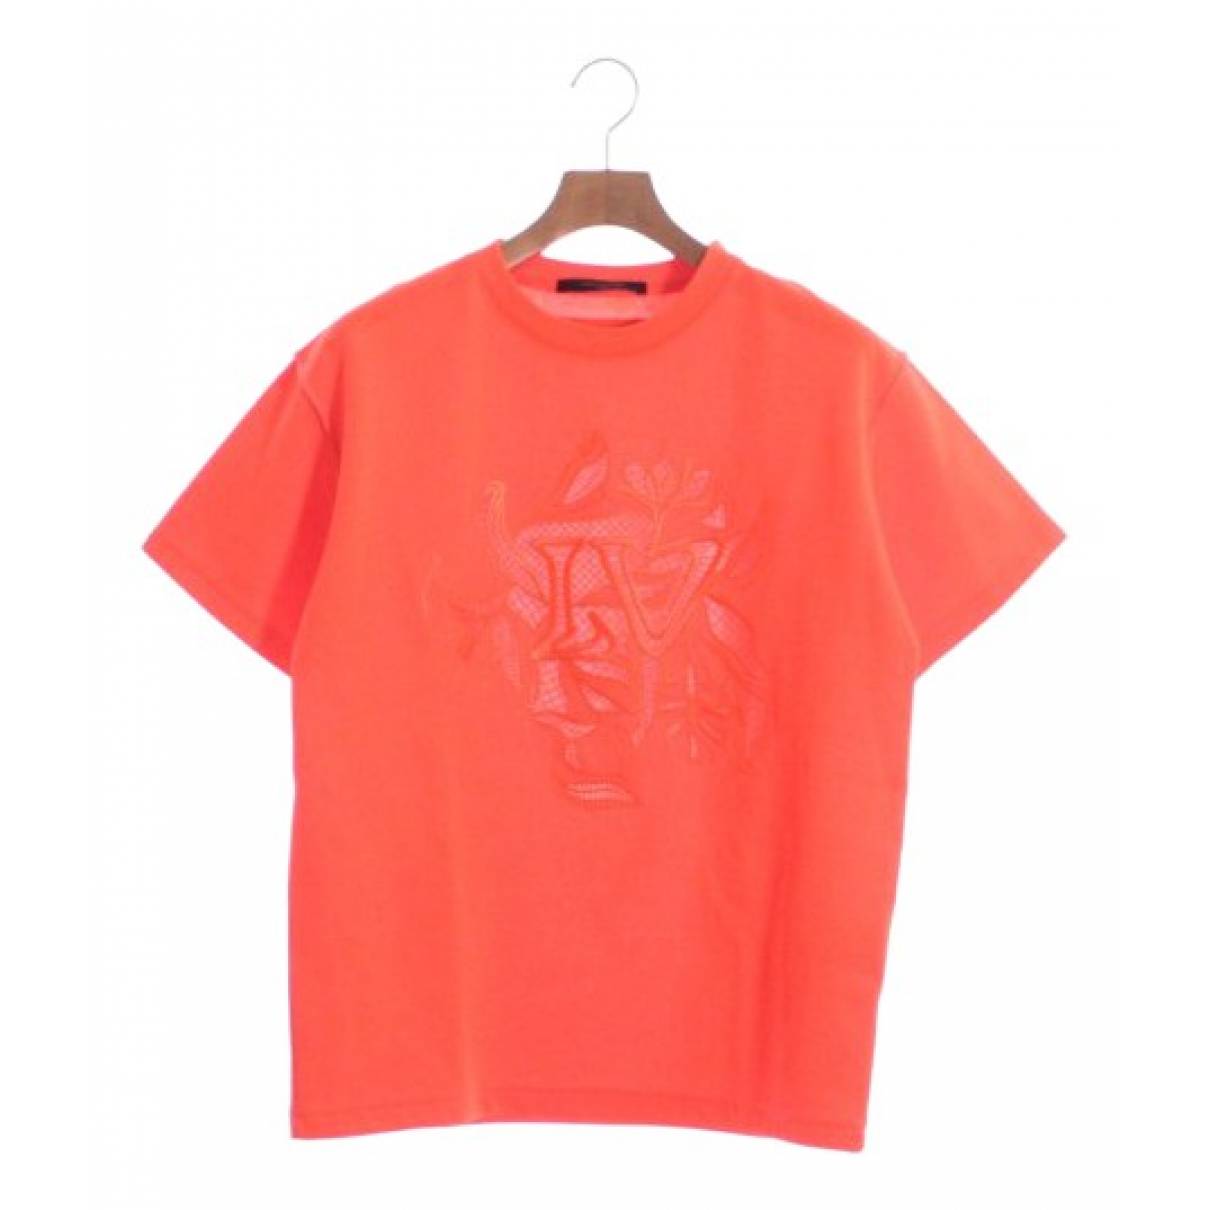 Louis Vuitton - Authenticated T-Shirt - Polyester Orange for Men, Very Good Condition